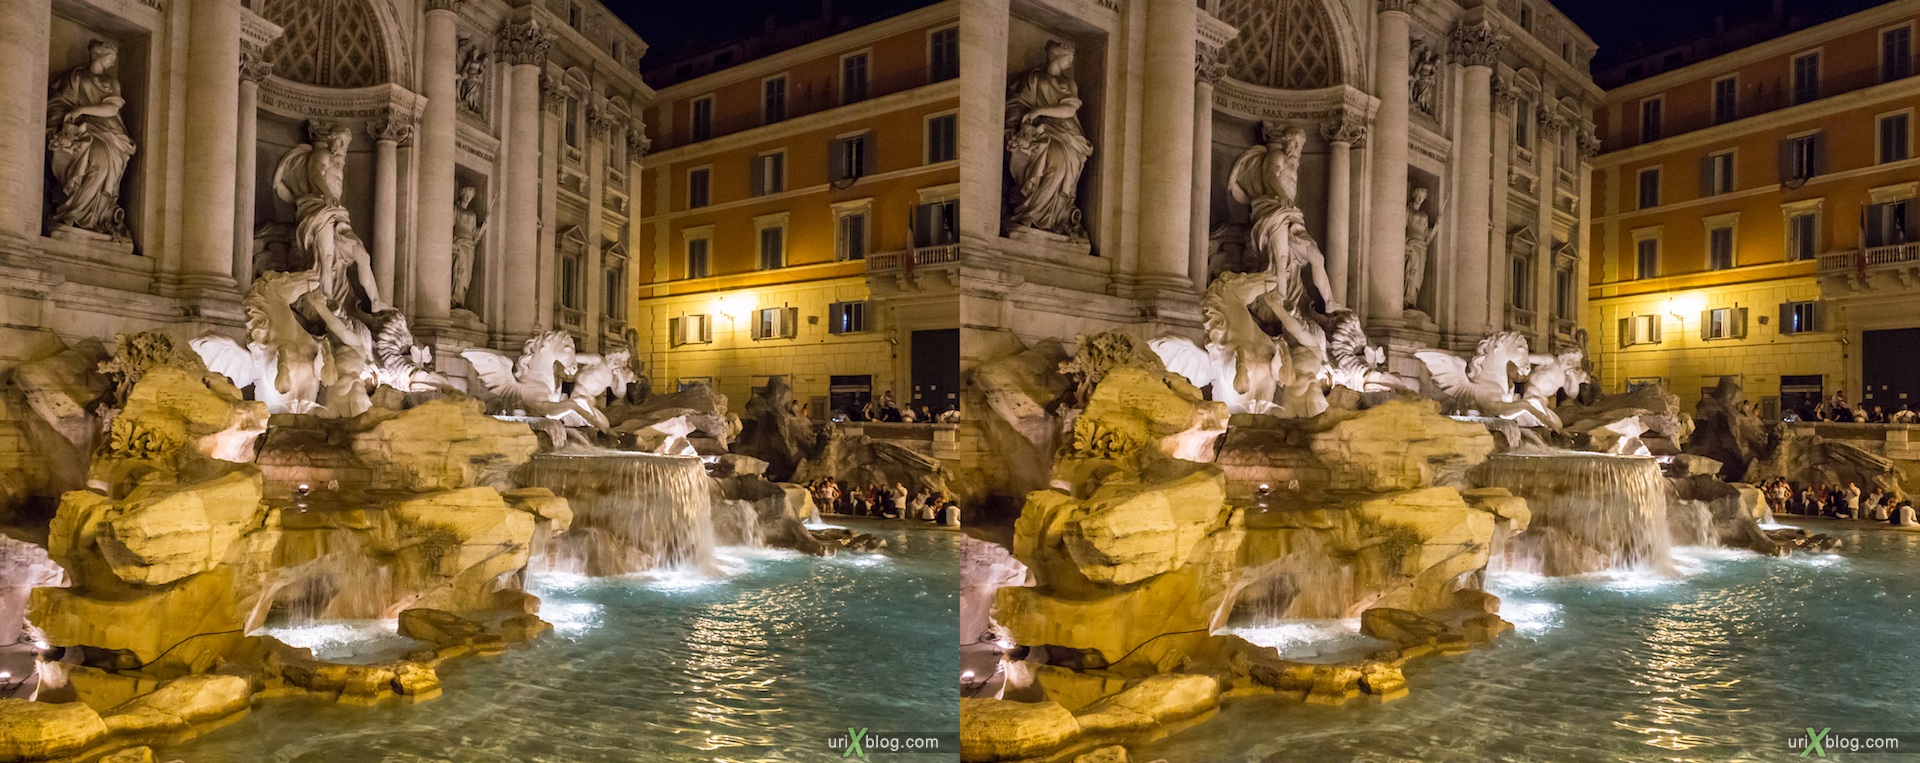 2012, Trevi fountain, Rome, Italy, 3D, stereo pair, cross-eyed, crossview, cross view stereo pair